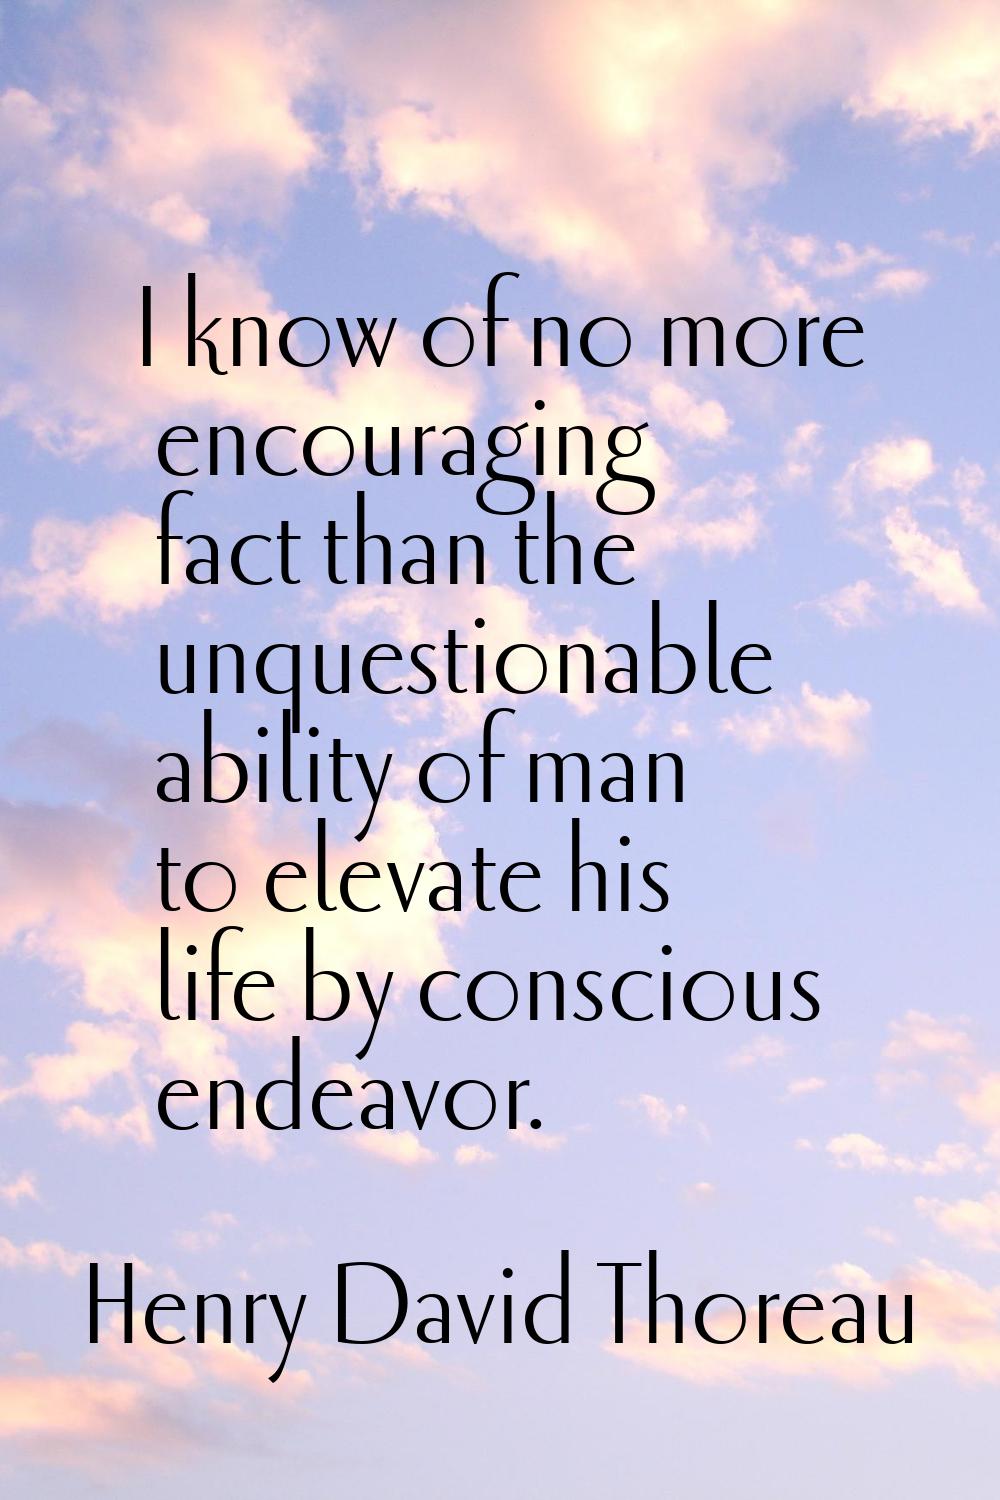 I know of no more encouraging fact than the unquestionable ability of man to elevate his life by co